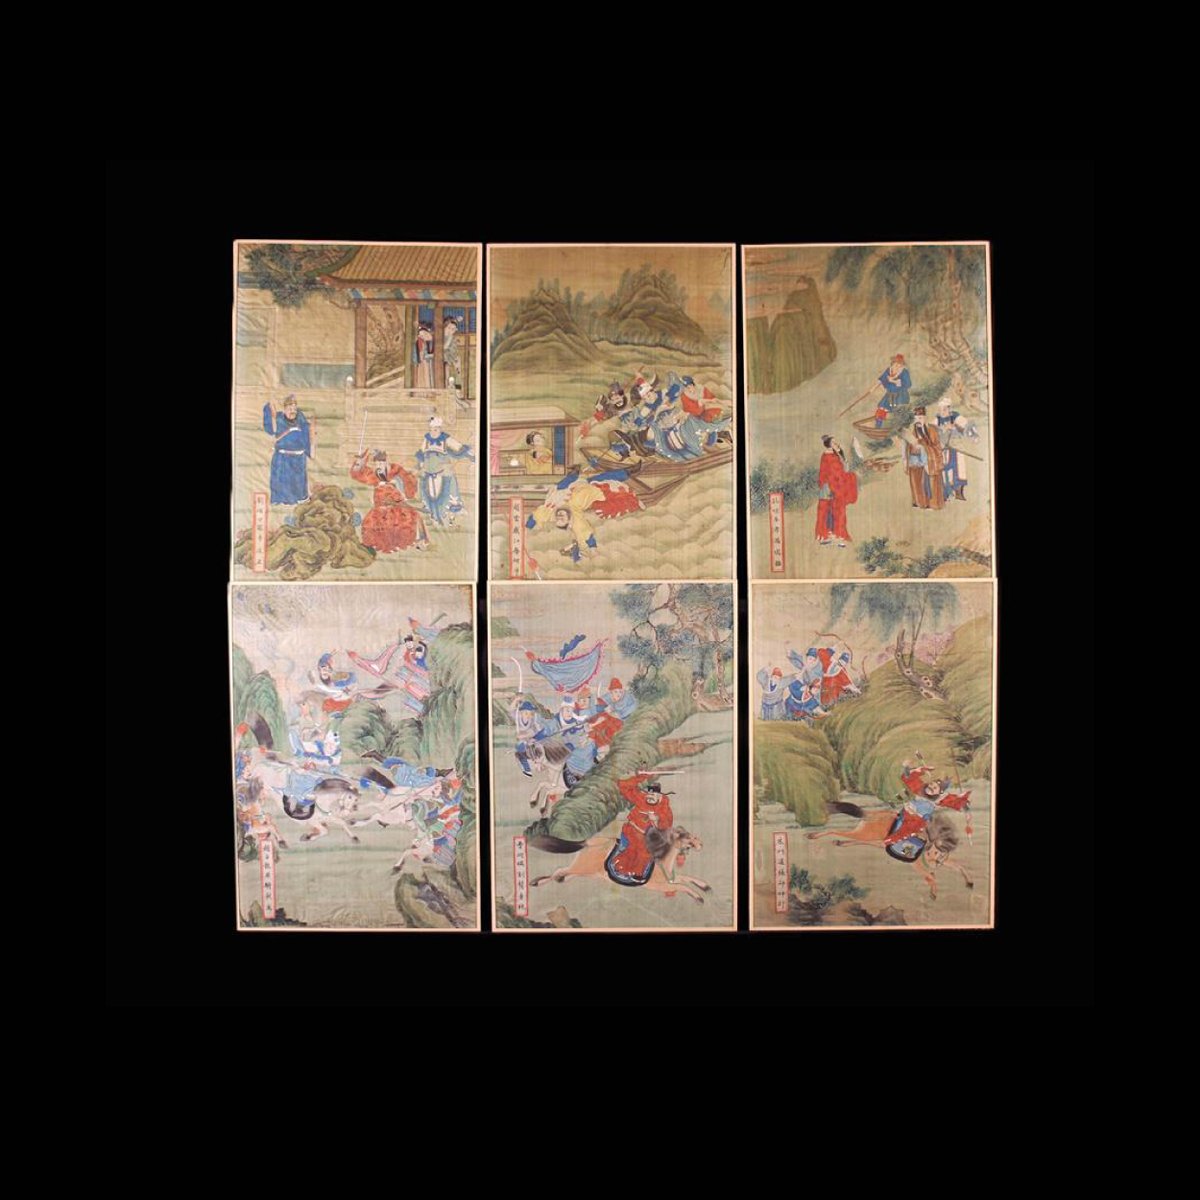 Will you secure this in our Sale today? A Set of Six Antique Chinese Silk Allegorical Paintings: The narrative scenes illustrating the tale of the Three Kingdoms; each with a band of calligraphy lower left corner. Lot 201. #auction #onlineauction #auctionhouse #auctioneer